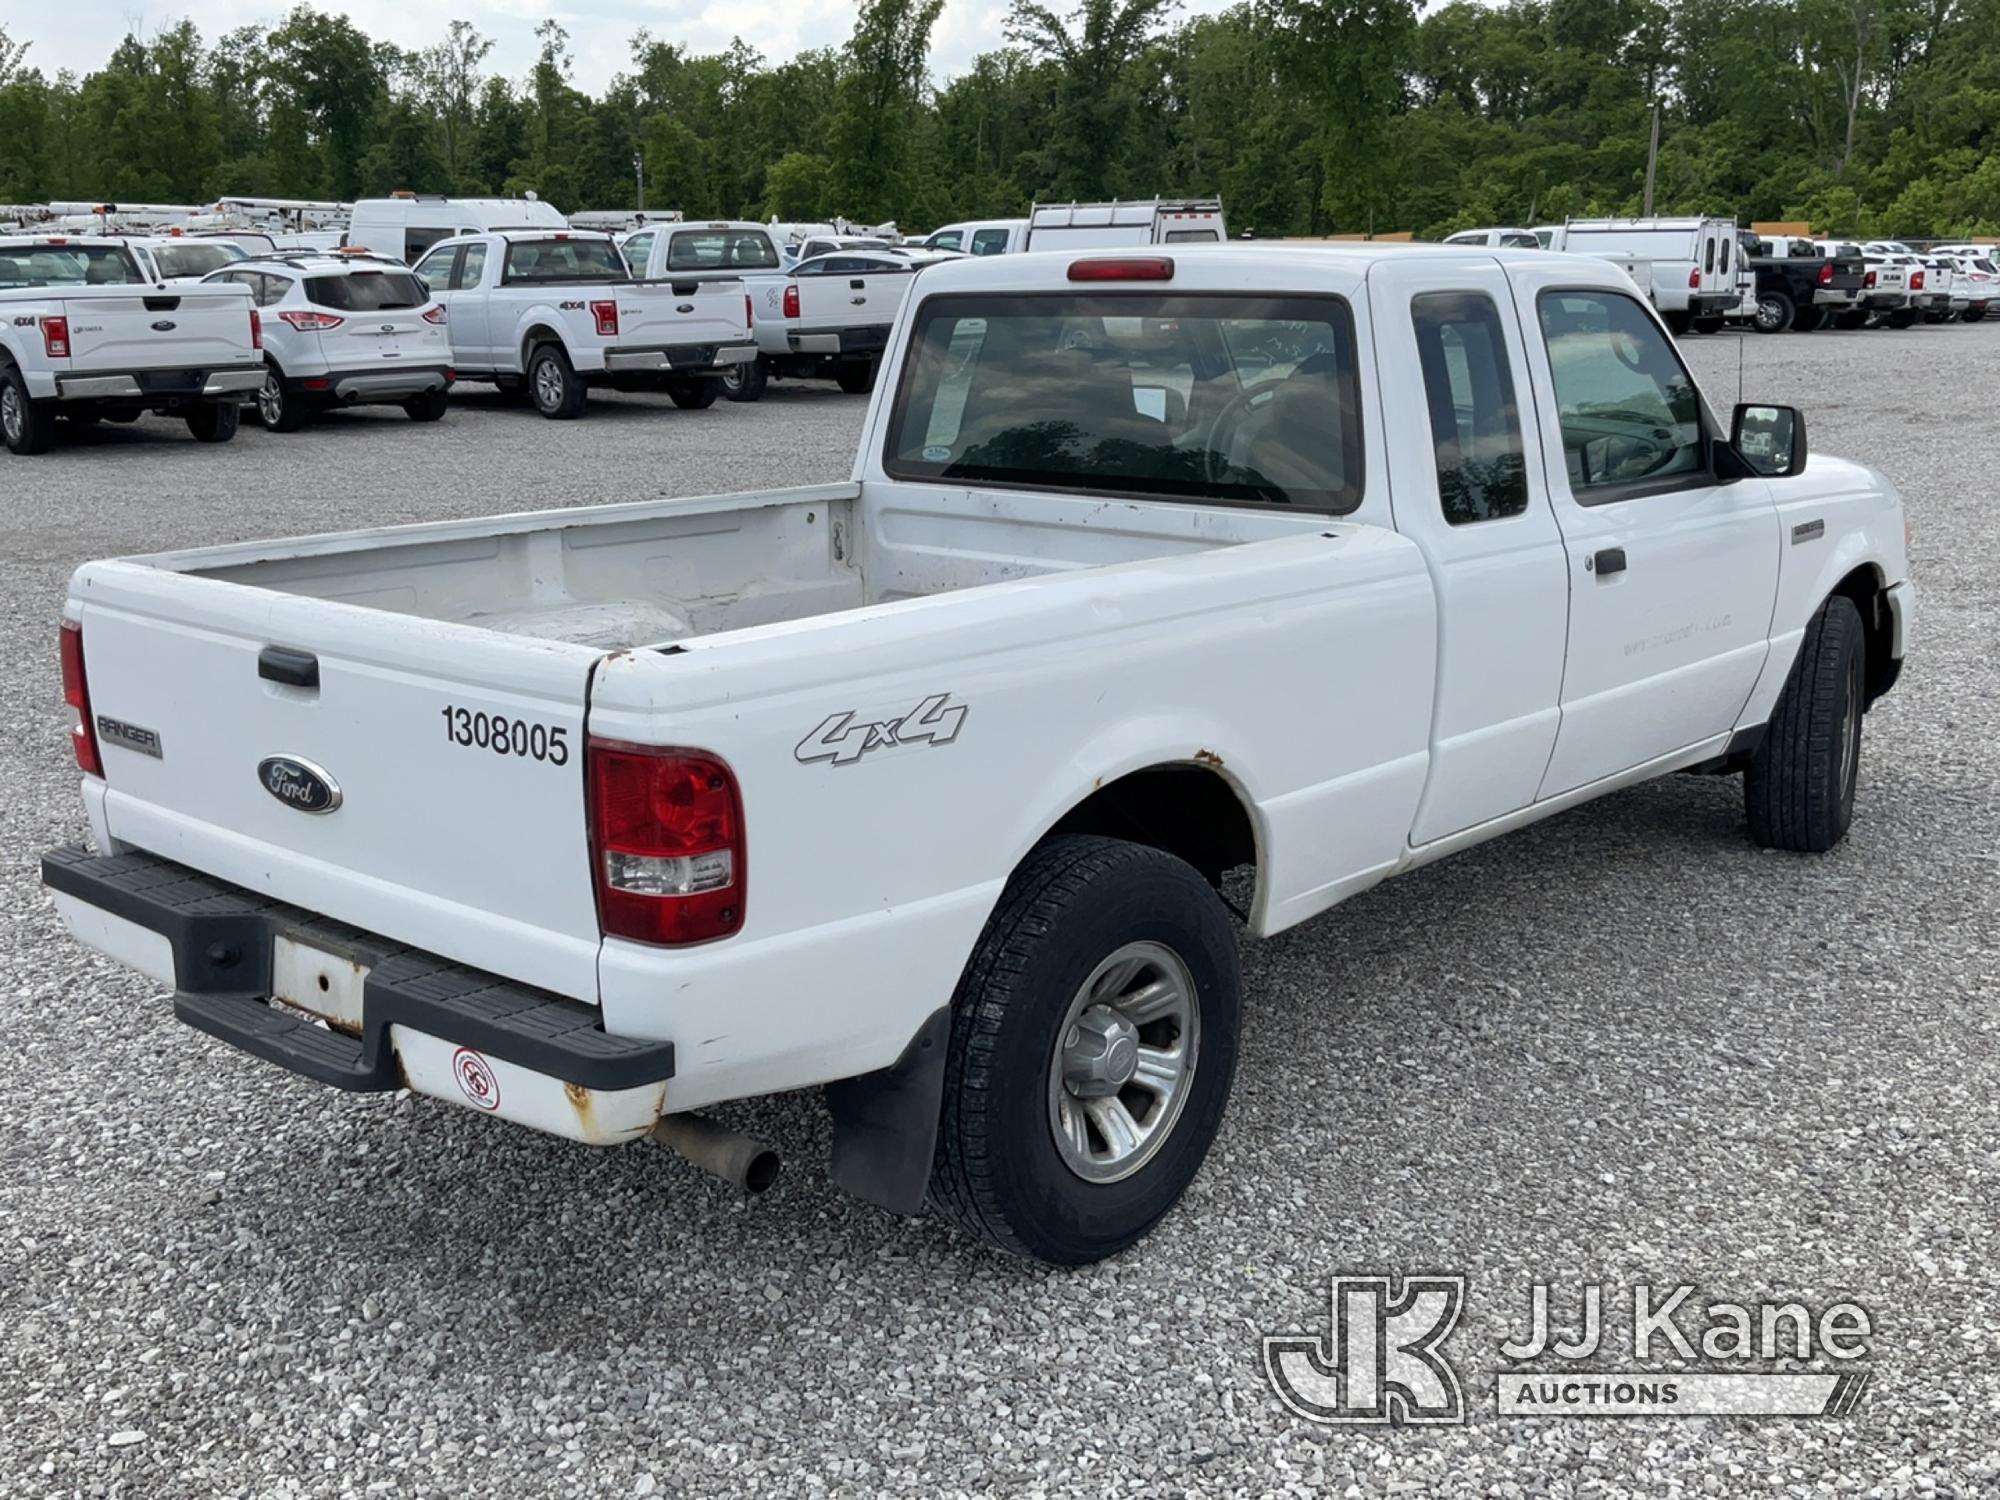 (Verona, KY) 2008 Ford Ranger 4x4 Extended-Cab Pickup Truck Runs & Moves) (Rust Damage, Coolant Leak